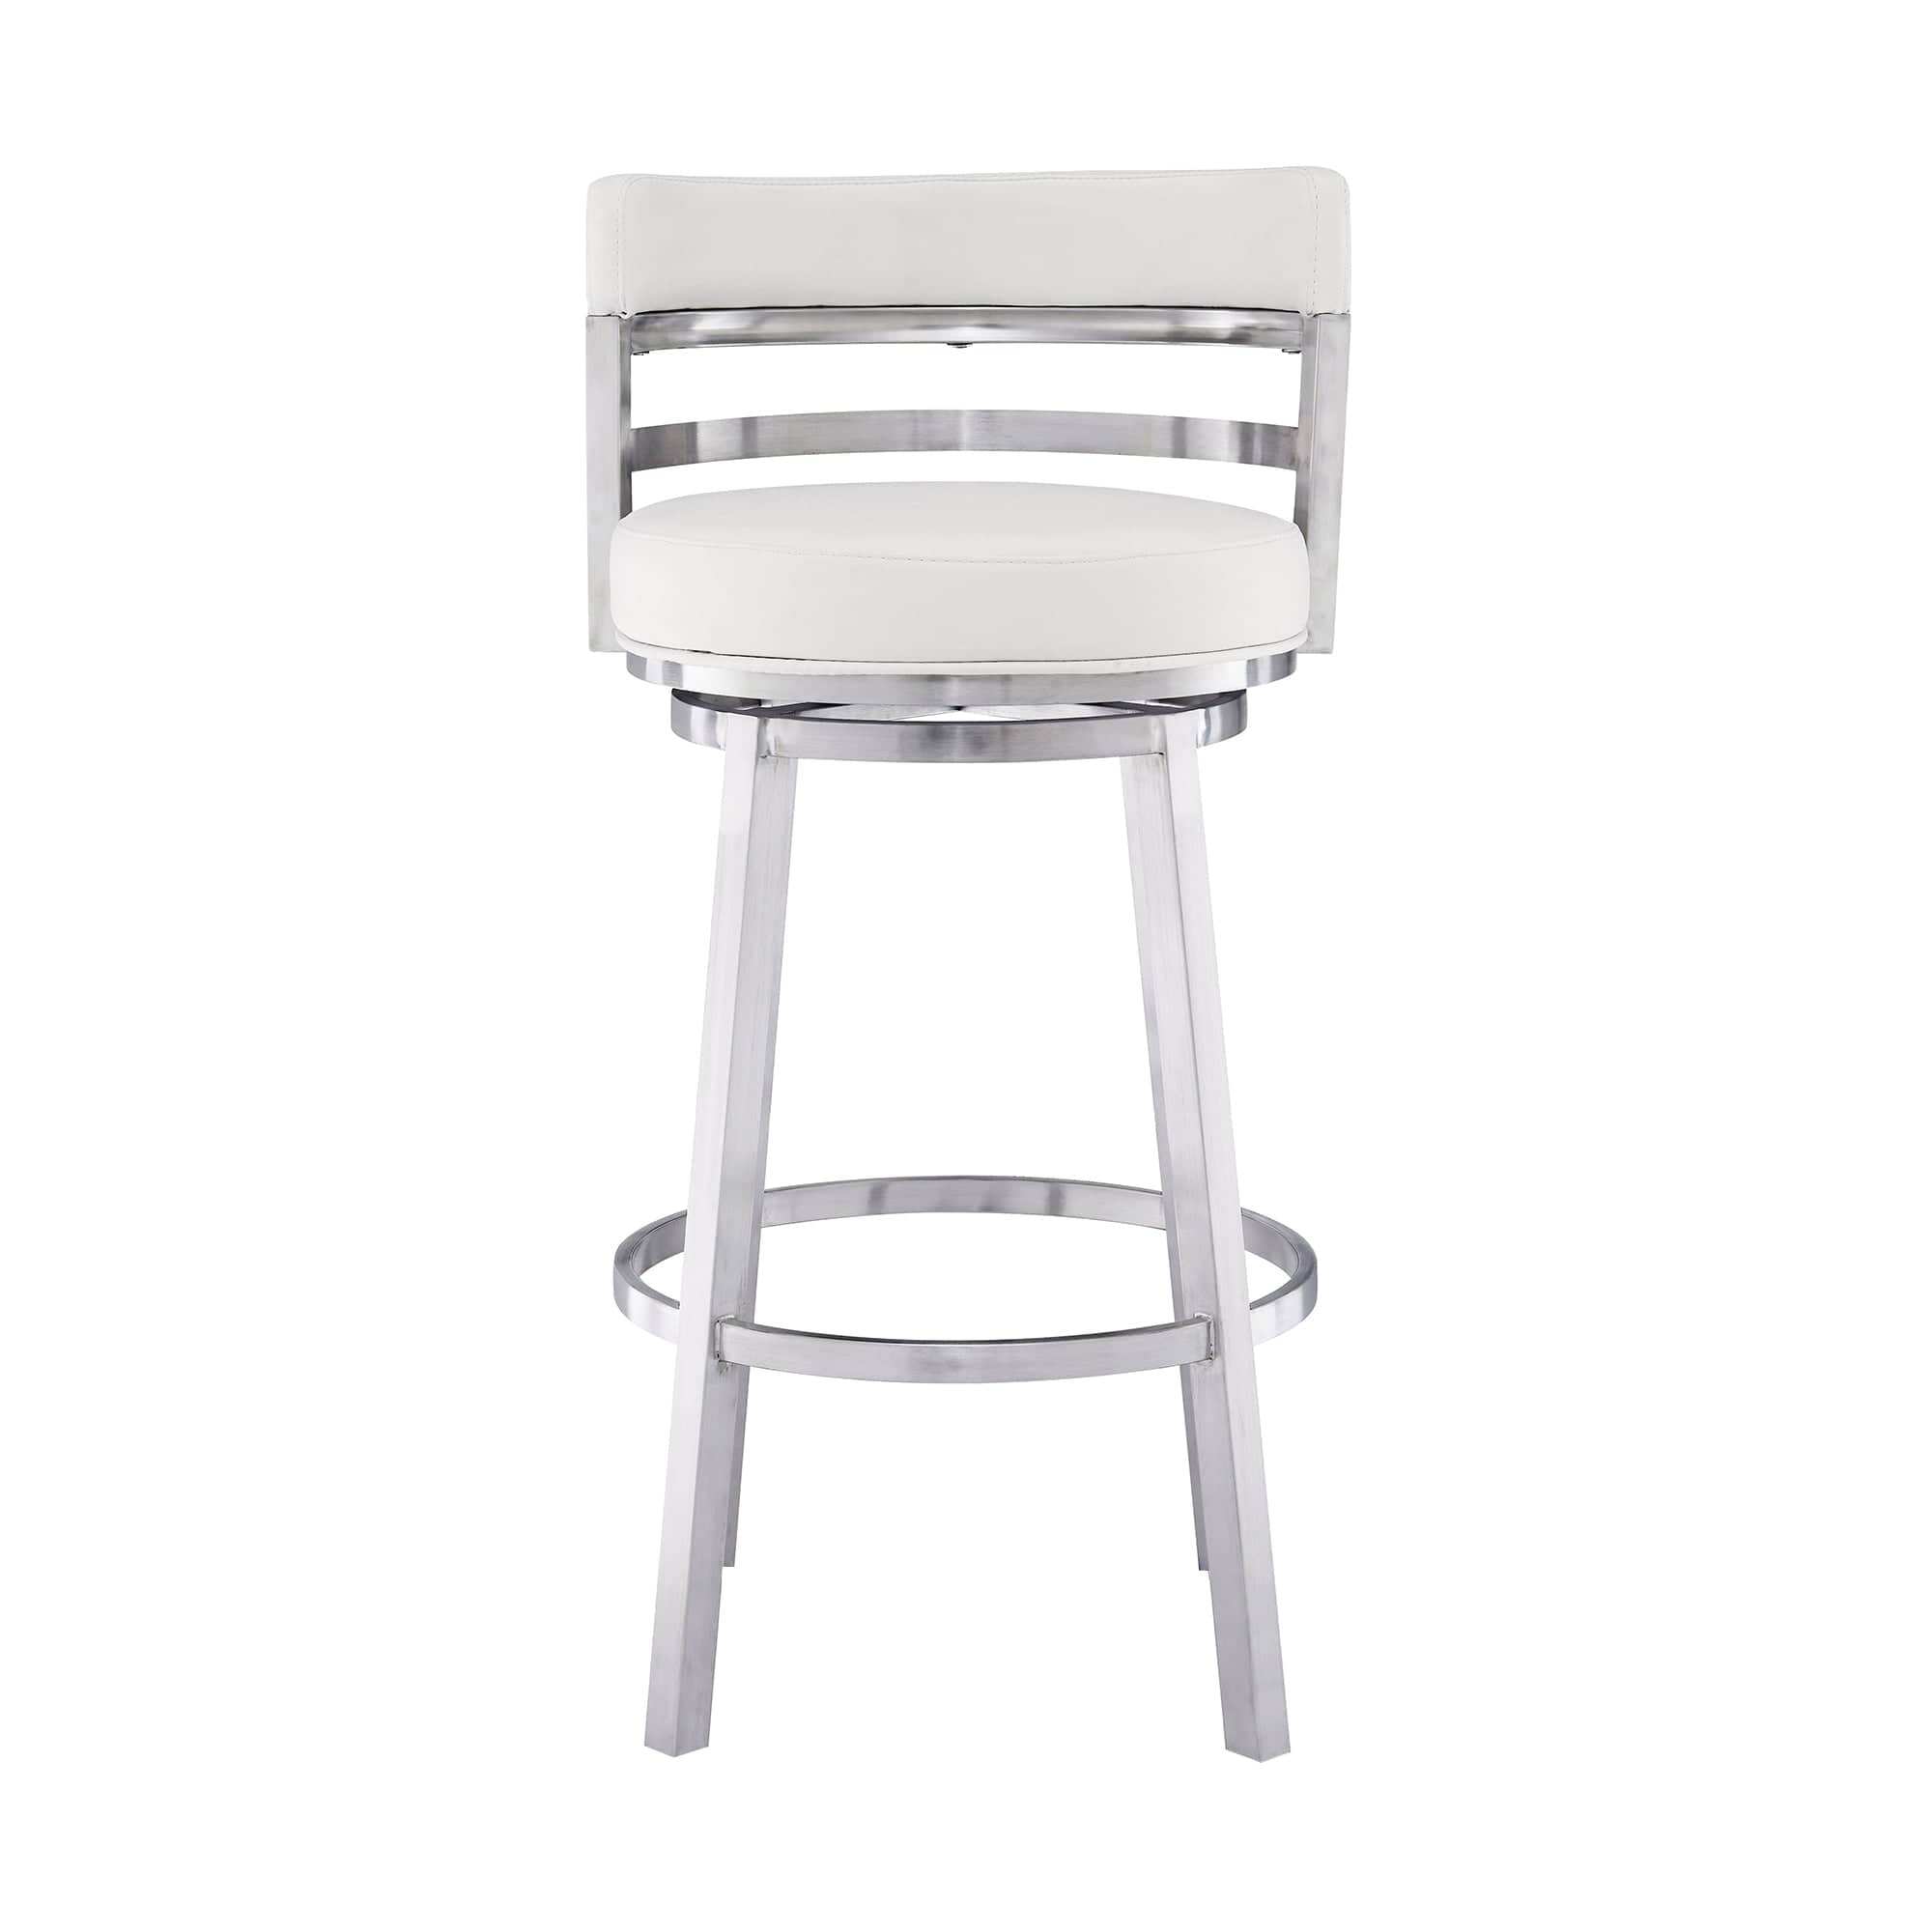 Armen Living Barstool Armen Living | Madrid 30" Bar Height Swivel White Faux Leather and Brushed Stainless Steel Bar Stool | LCMABABSWH30